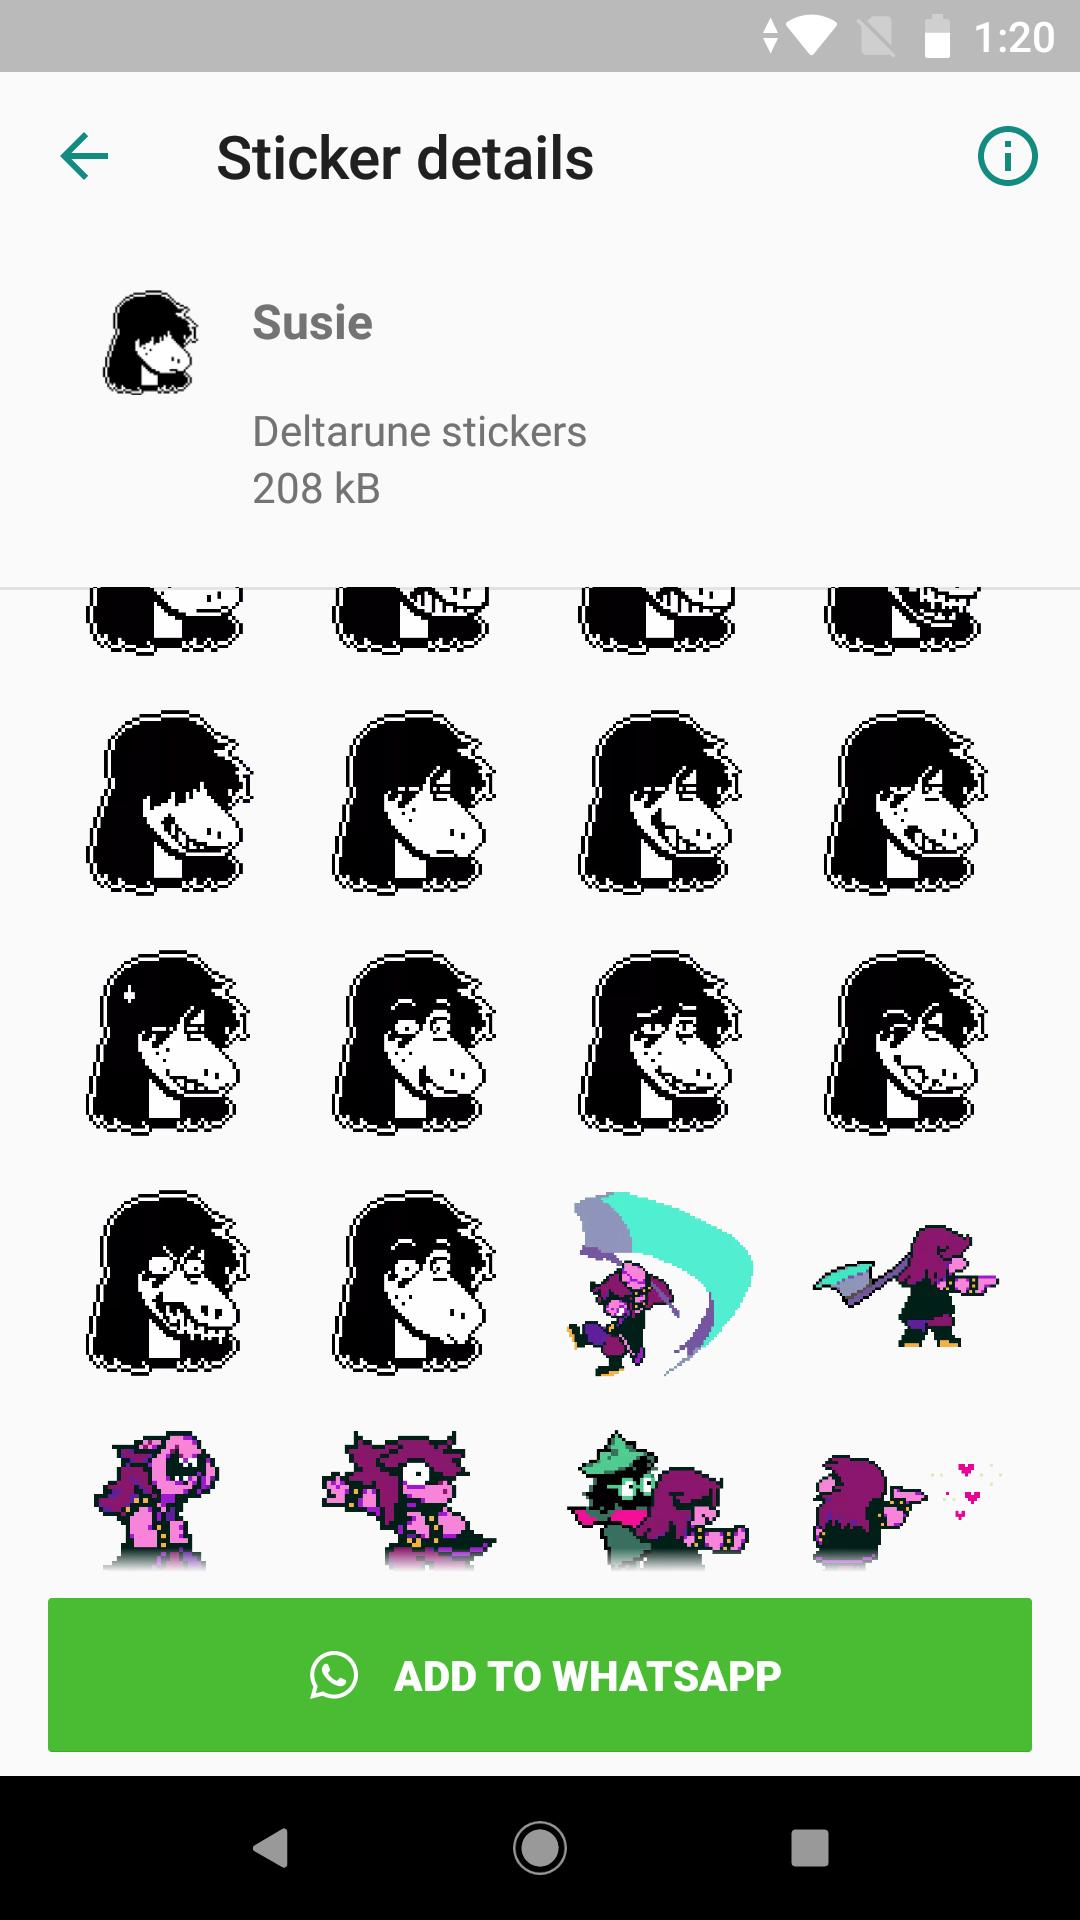 Undertale And Deltarune Stickers For Whatsapp For Android Apk